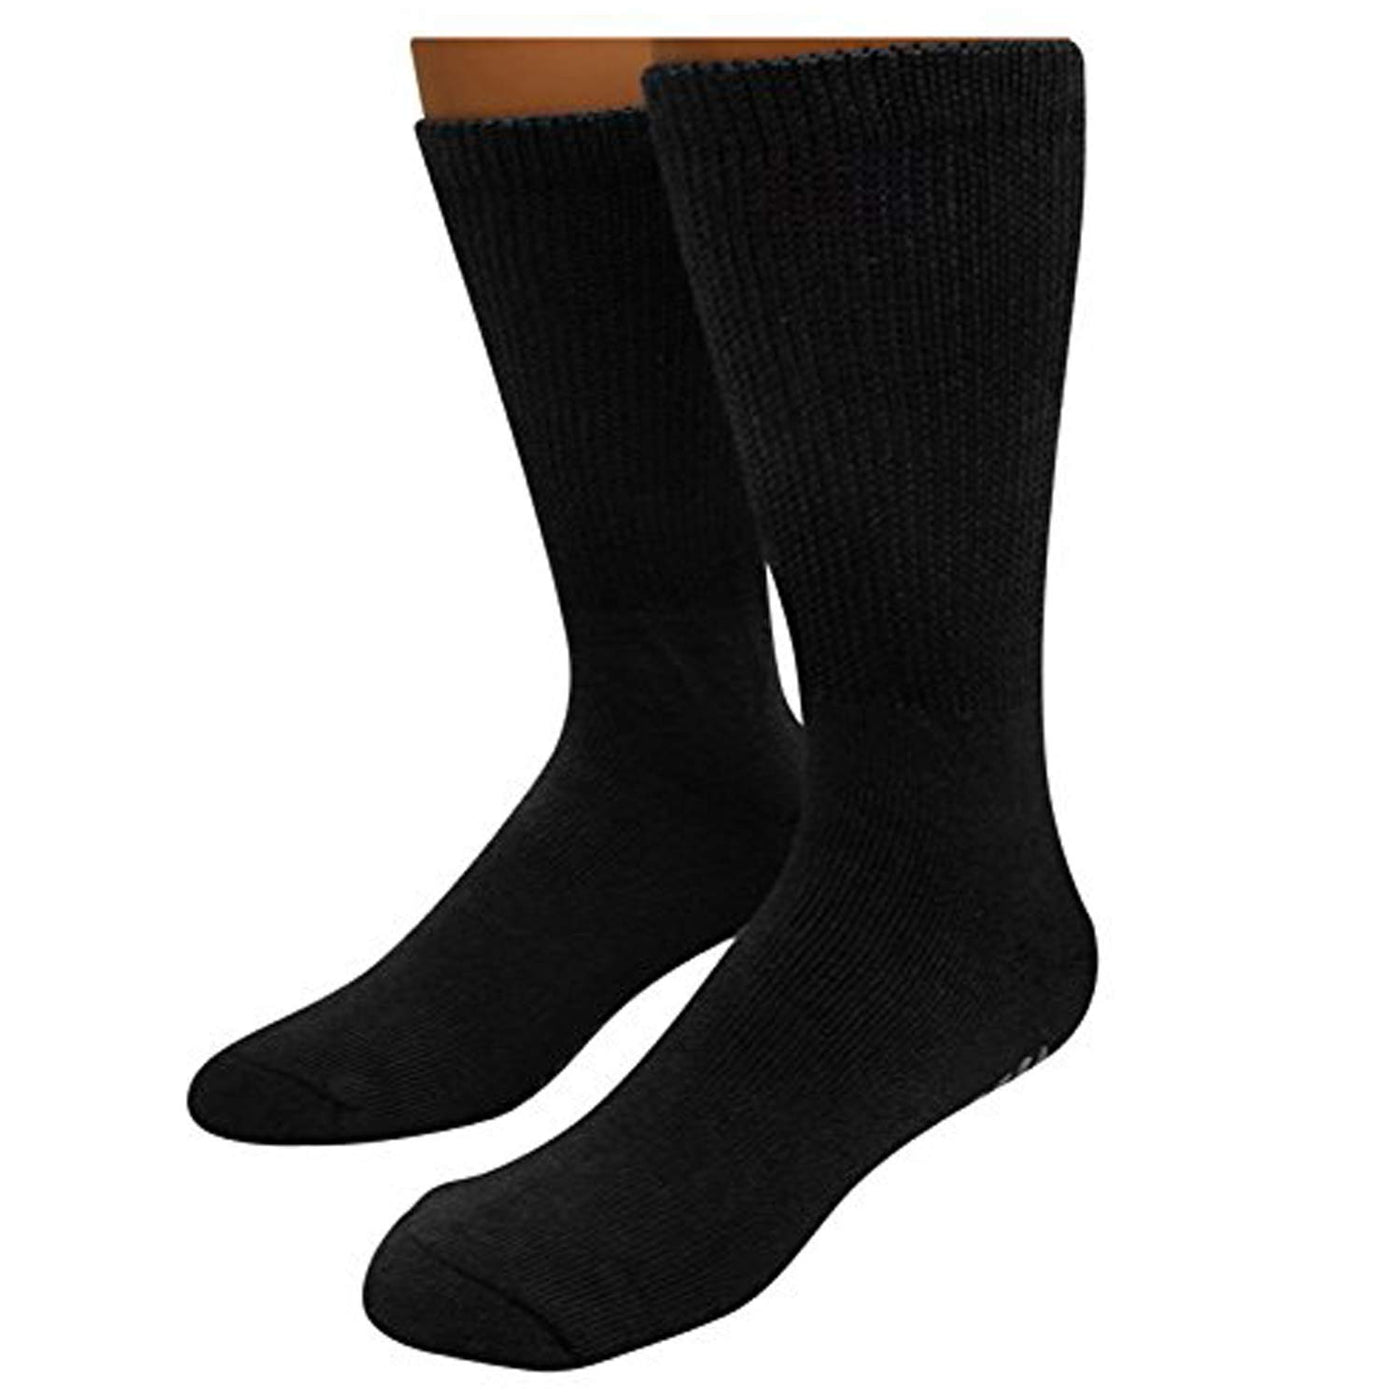 Diabetic Non Skid Hospital Slipper Socks (12-Pack) - Noble's Health Care Products Solutions